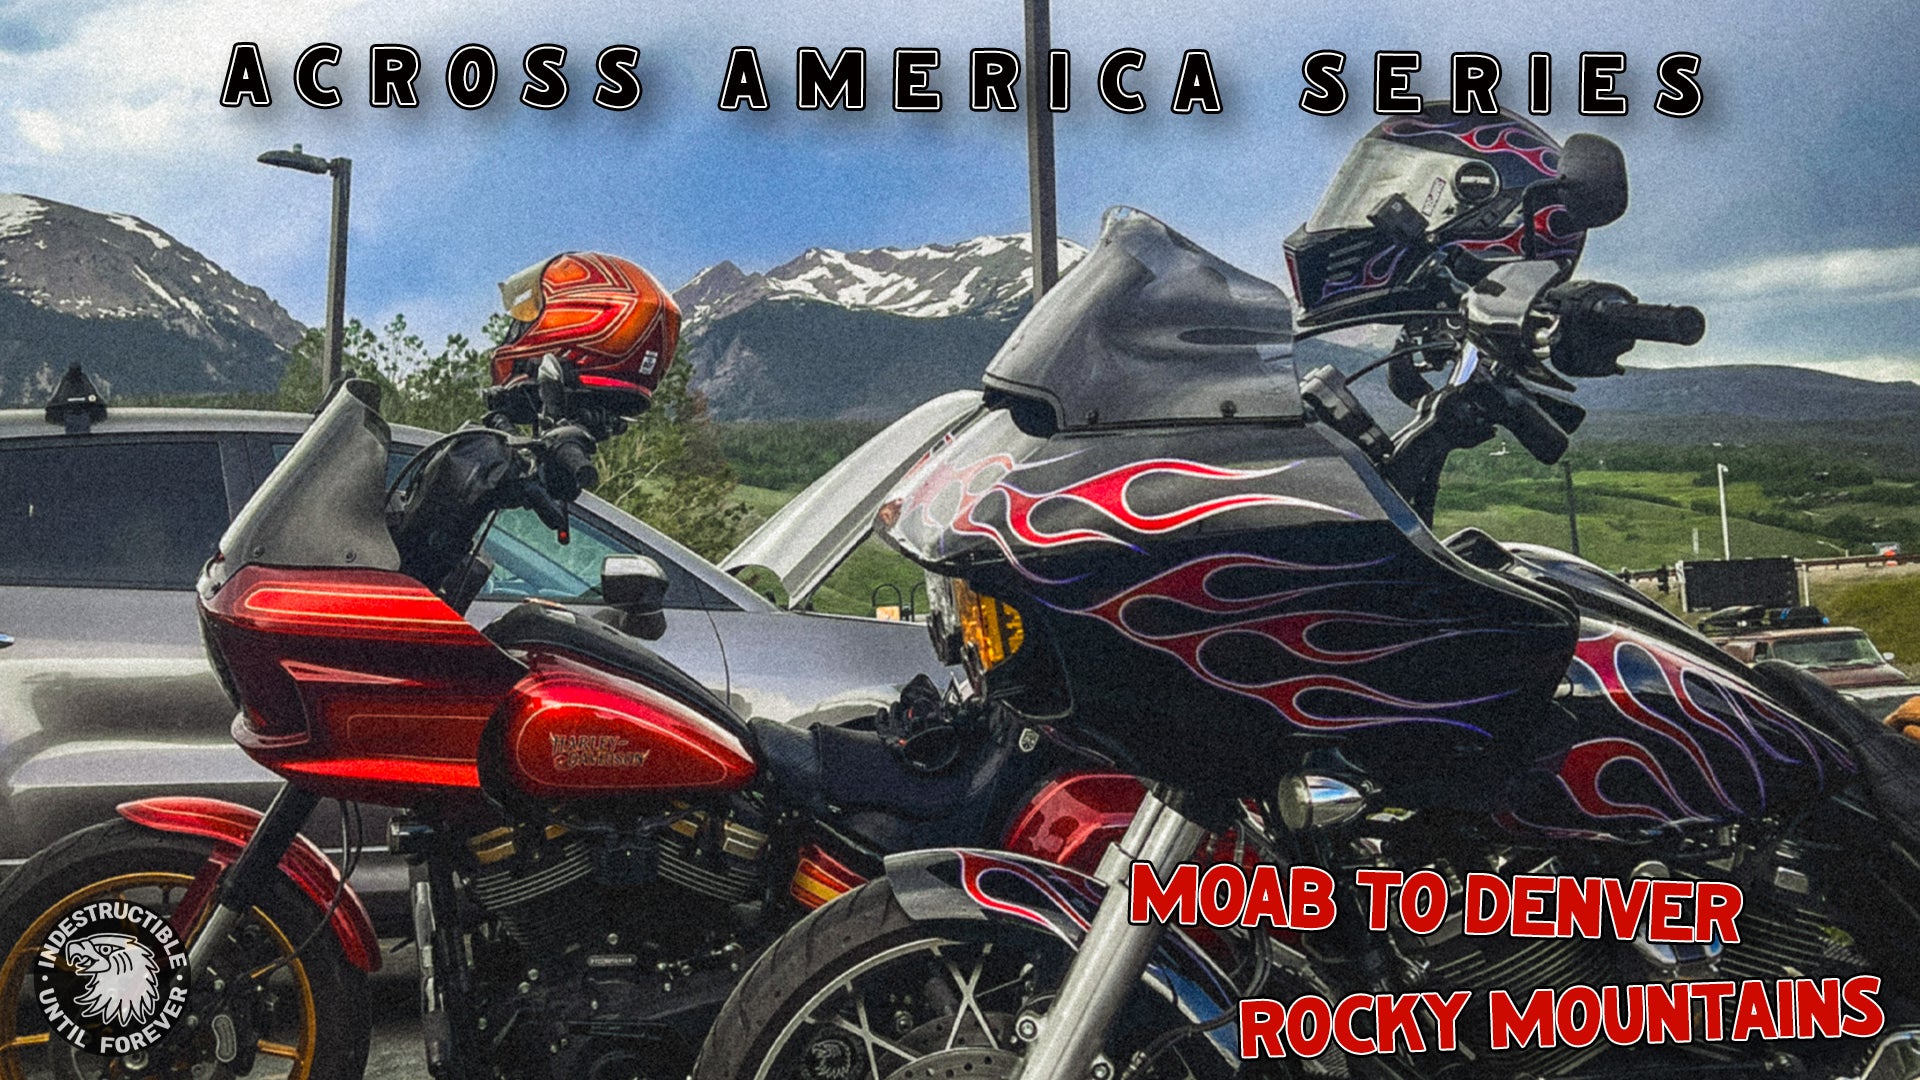 We Ride Our Custom Harley Davidson's Over The Rocky Mountains!